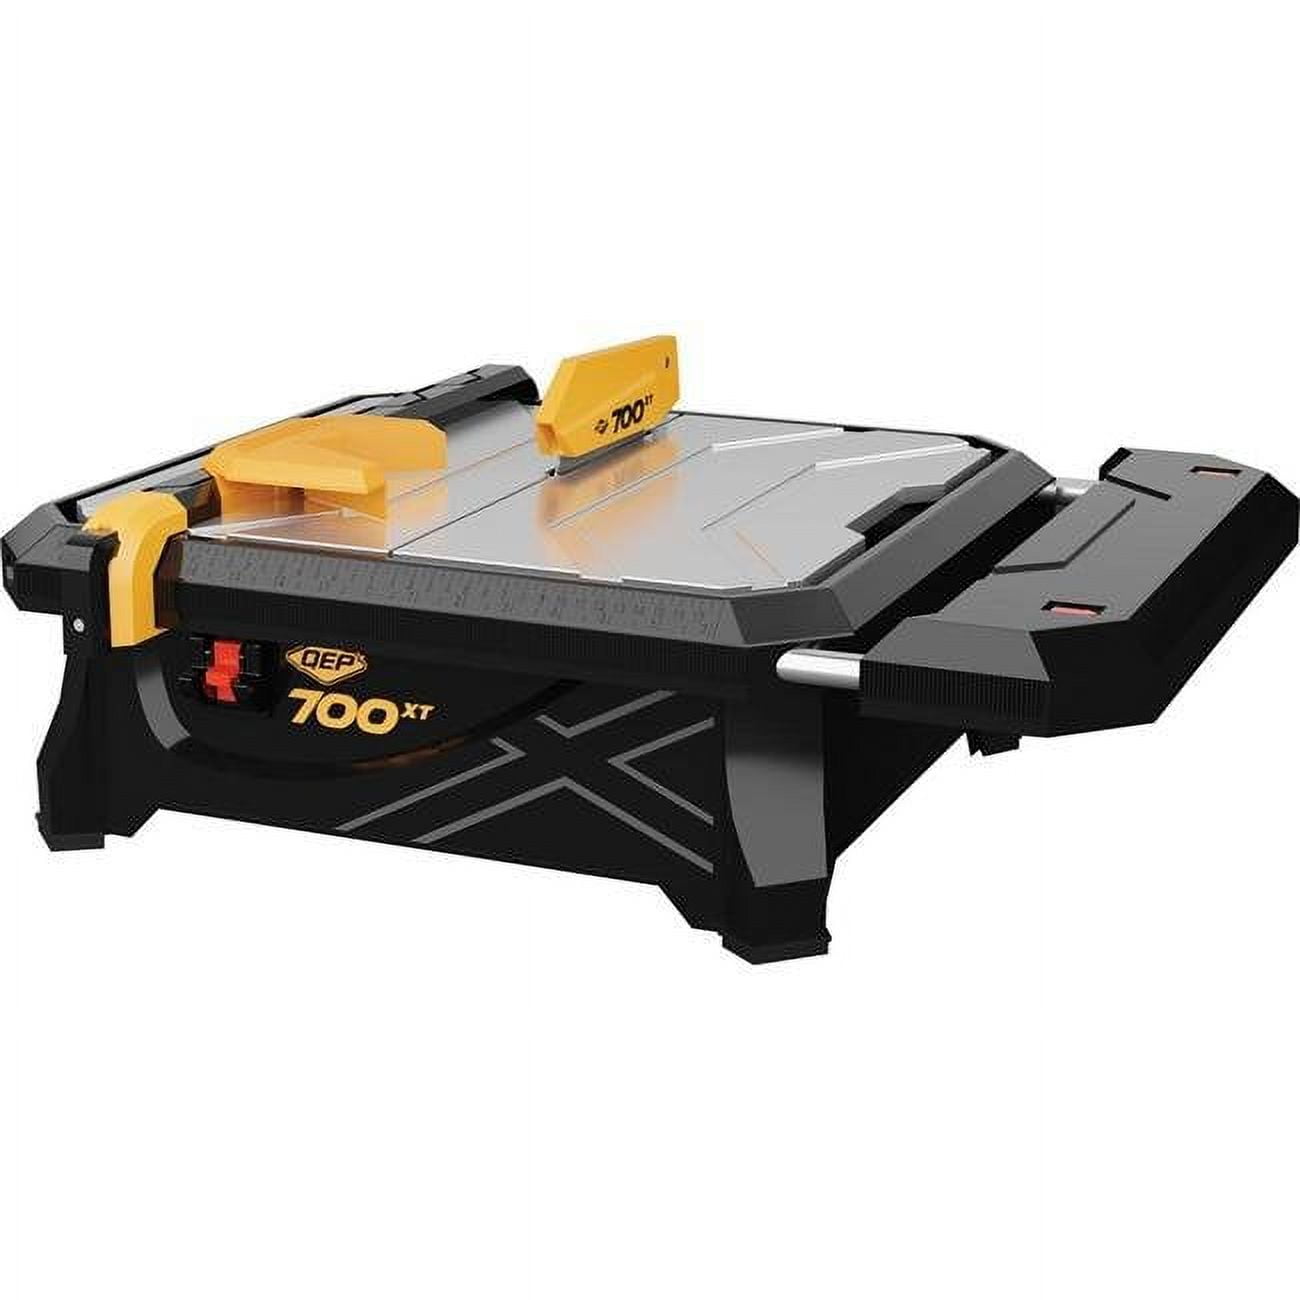 QEP in. 700XT Wet Tile Saw with Table Extension